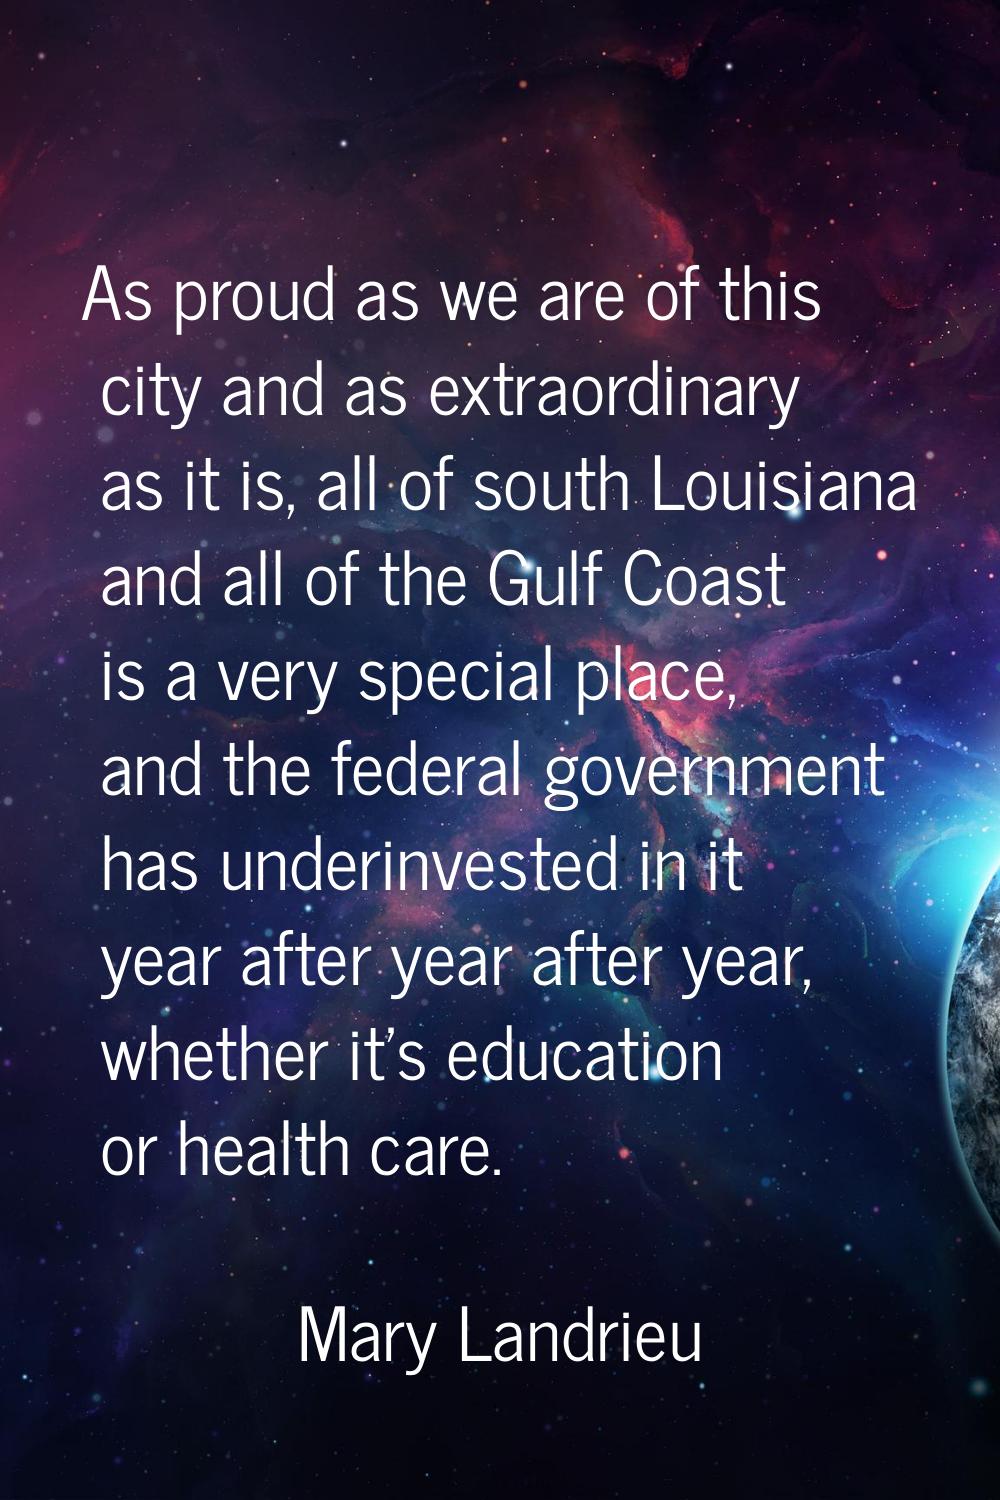 As proud as we are of this city and as extraordinary as it is, all of south Louisiana and all of th